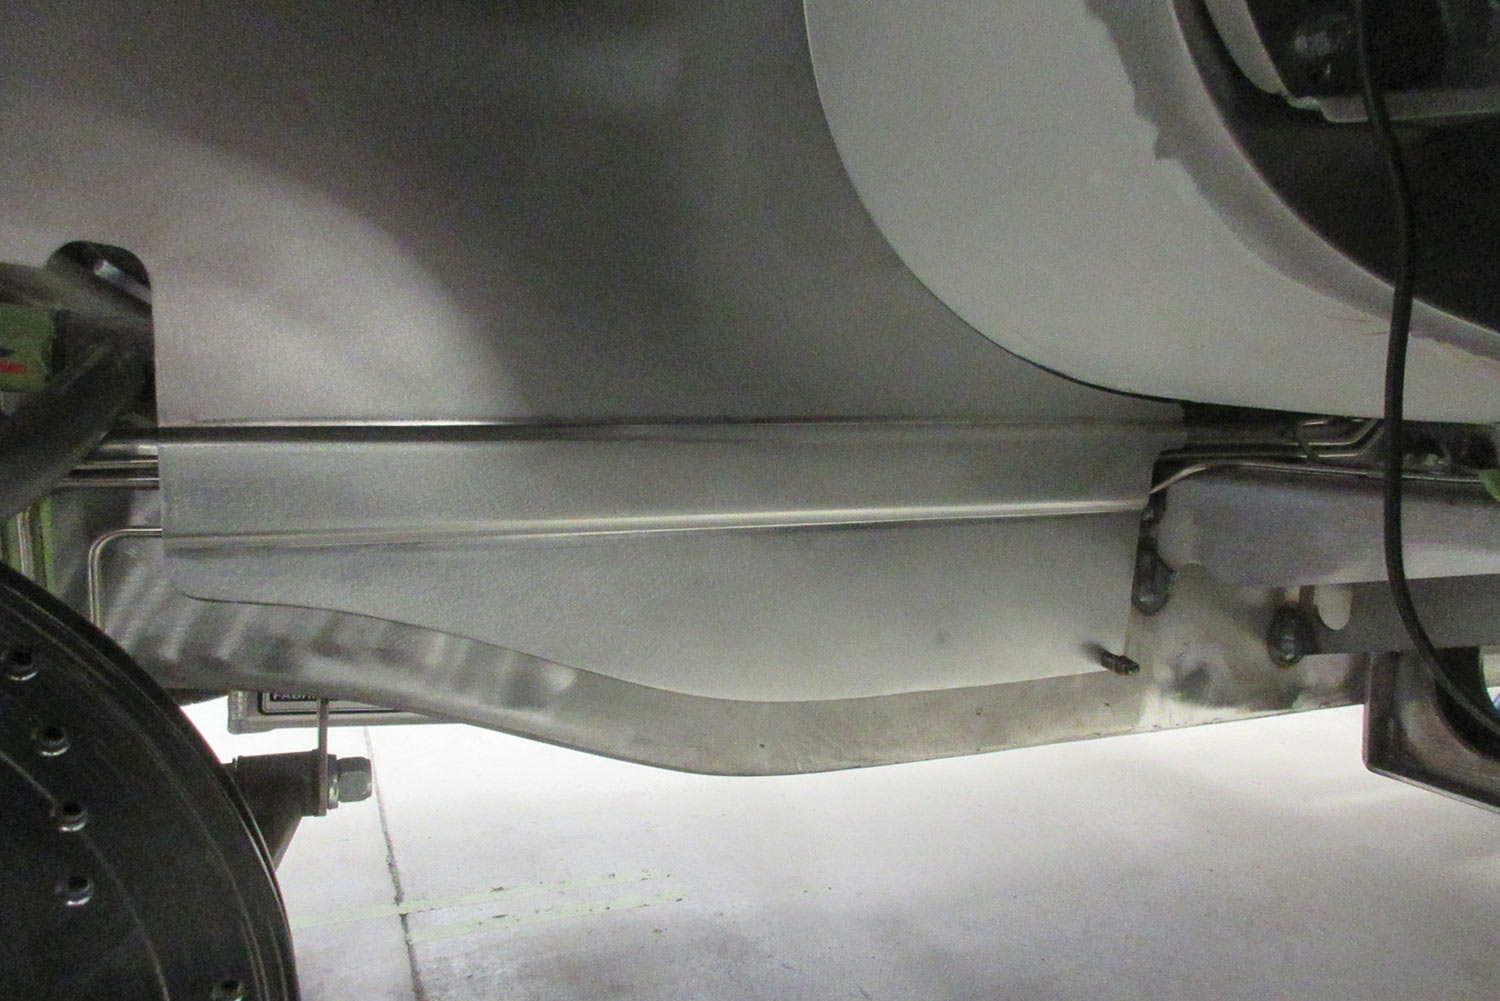 with the panel mounted, you can see how the channel neatly encloses the brake lines